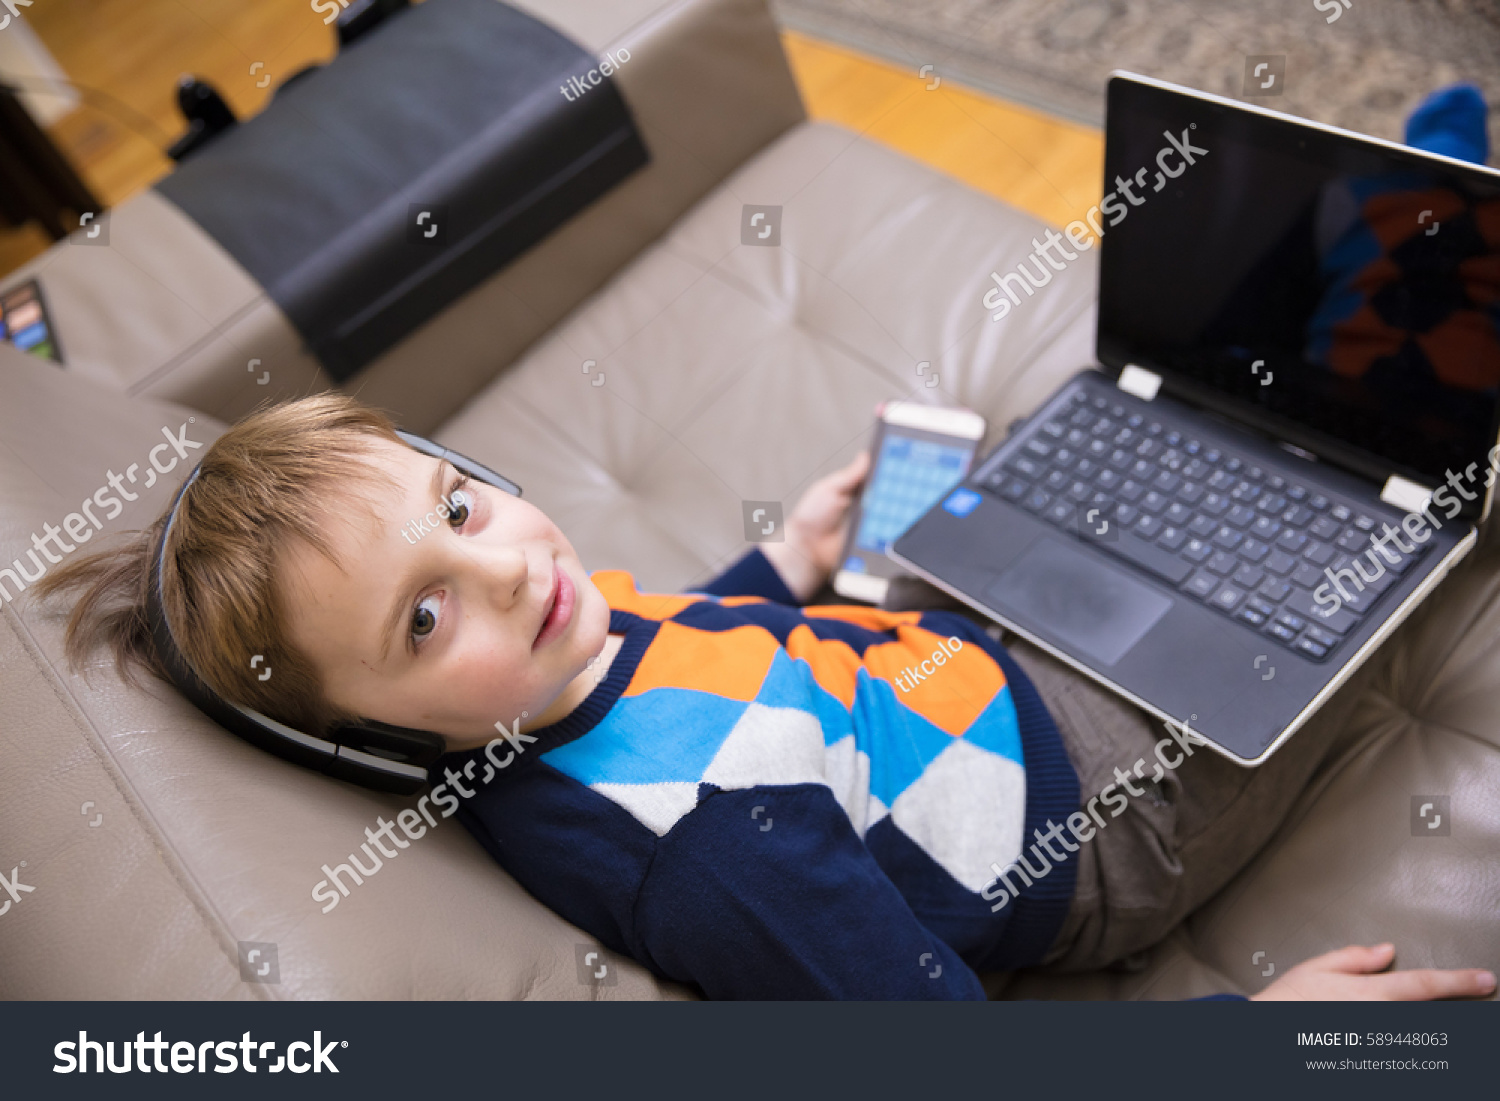 Little boy using a white  laptop computer at home along with mobile phone, wearing headphones, playing some games. #589448063